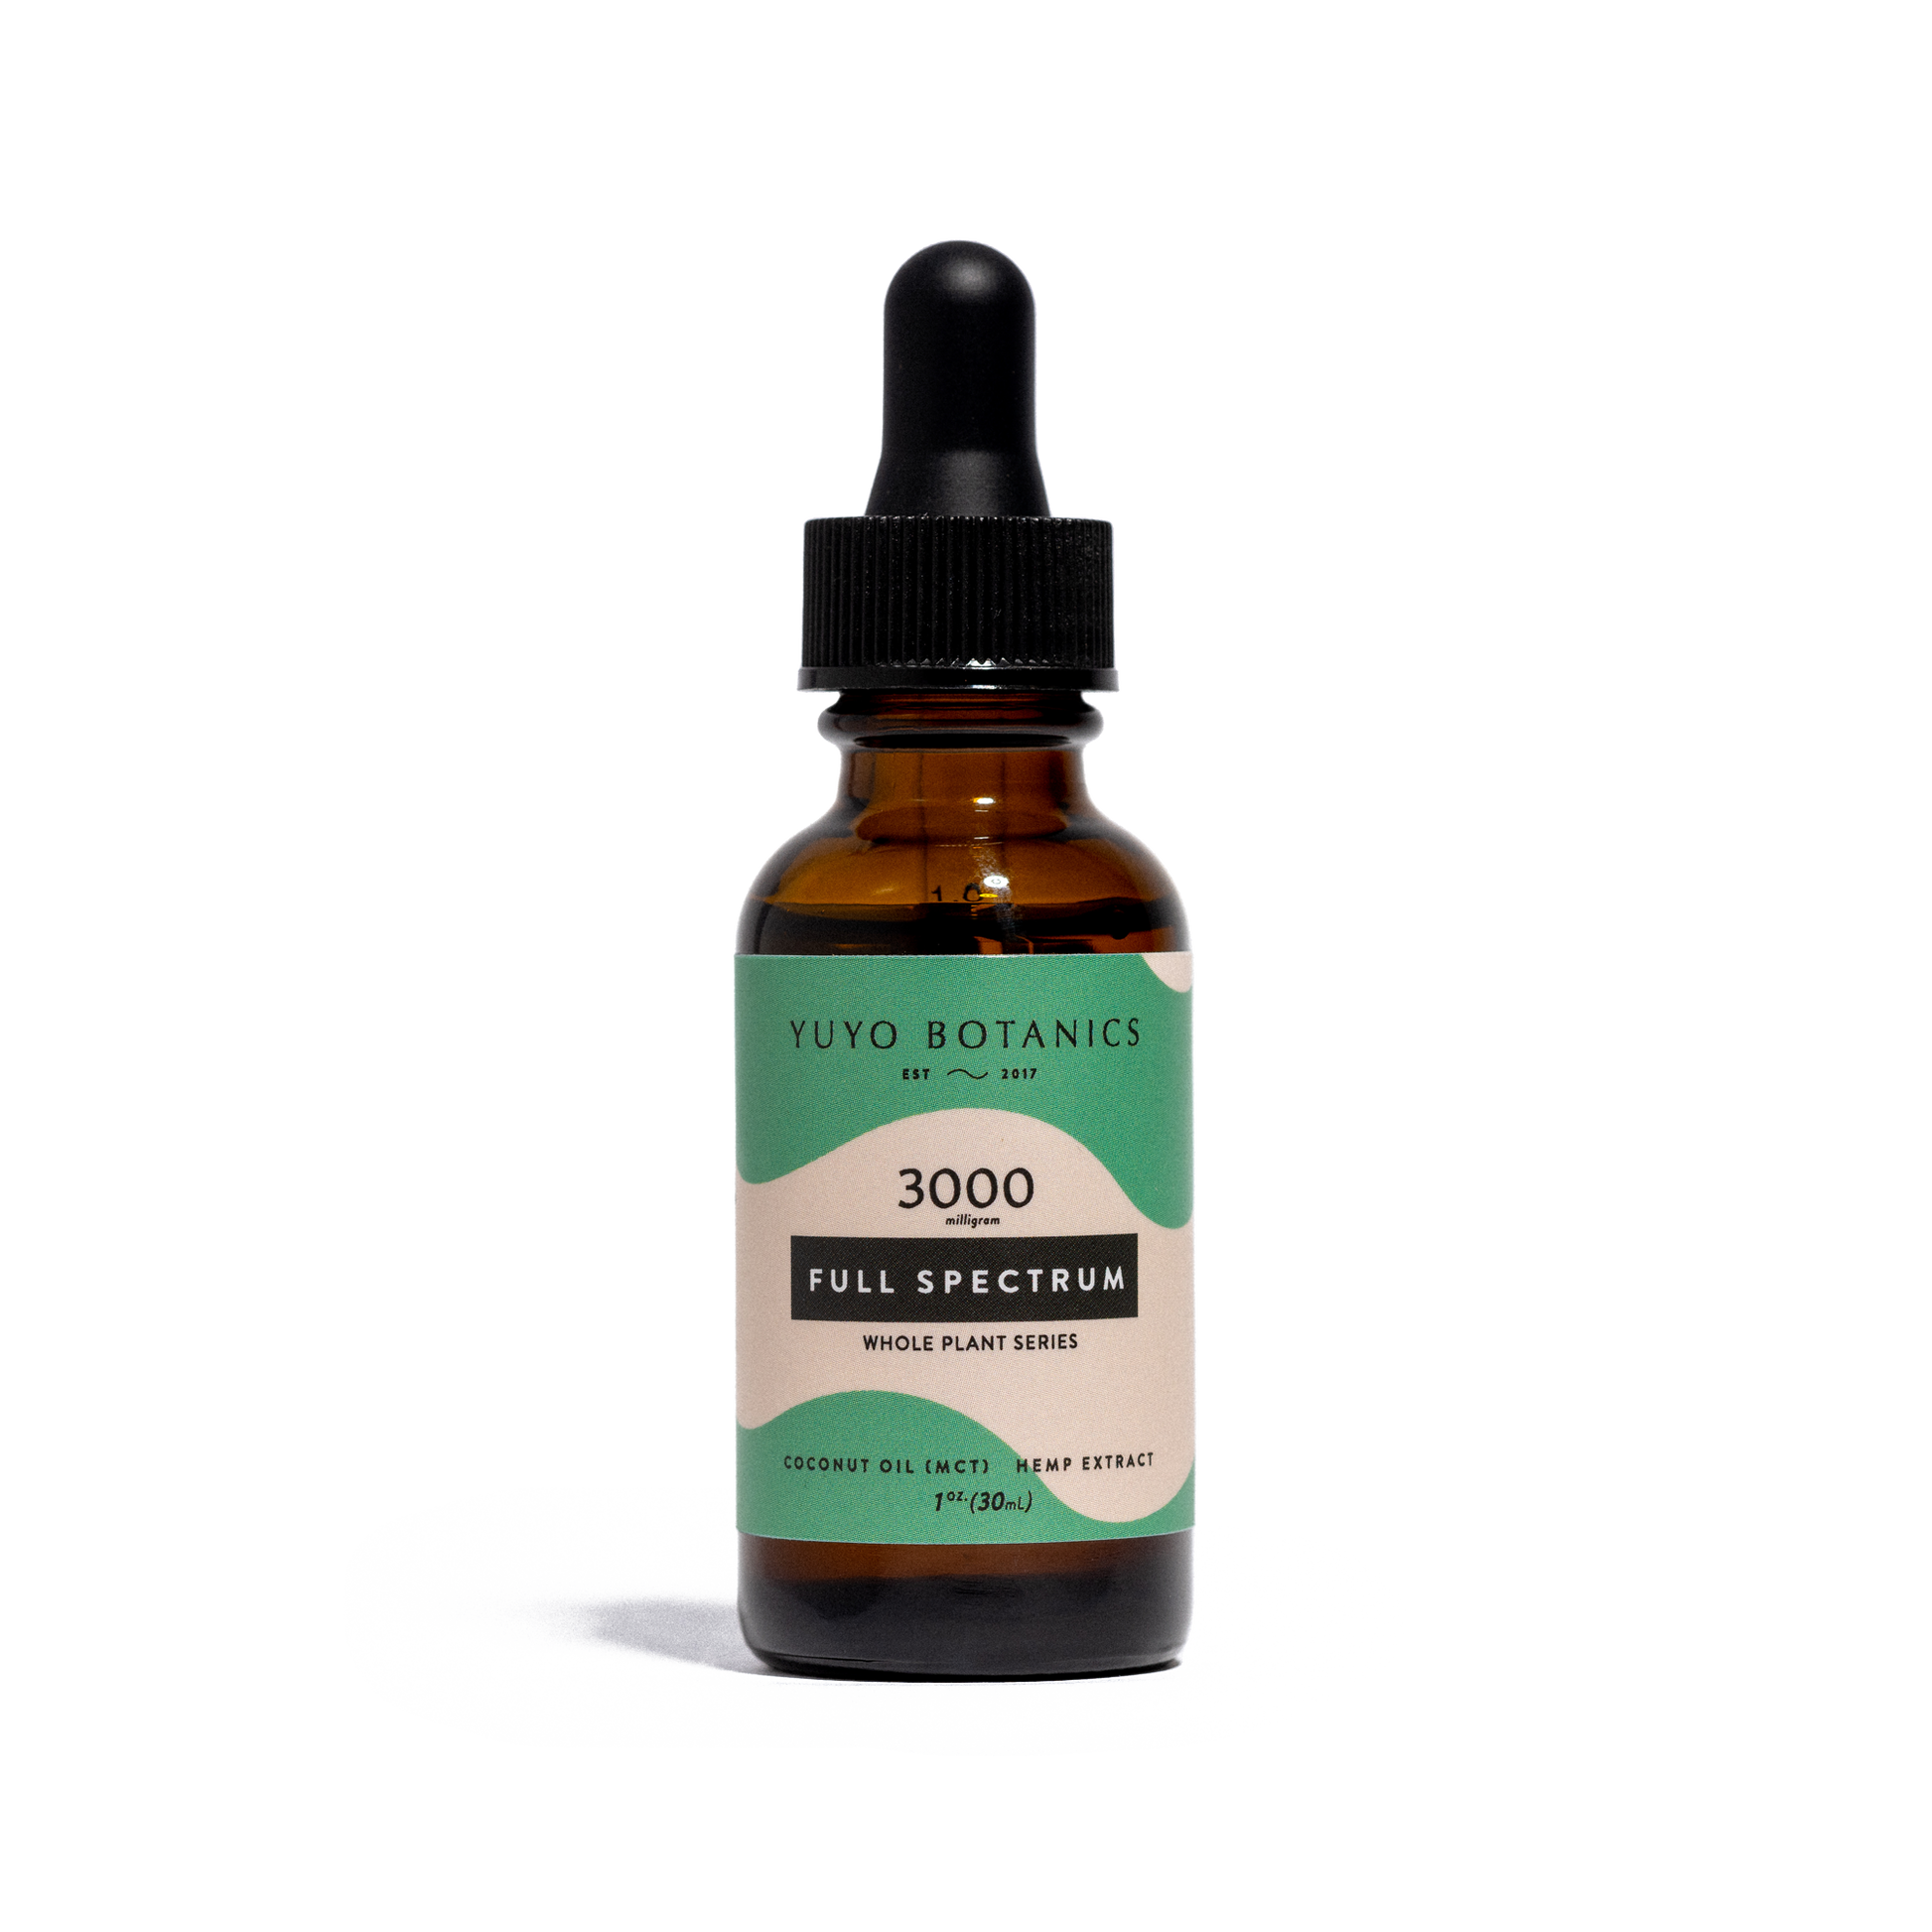 Yuyo Botanics Full Spectrum 3000 High-Potency Formula with therapeutic properties for holistic wellness